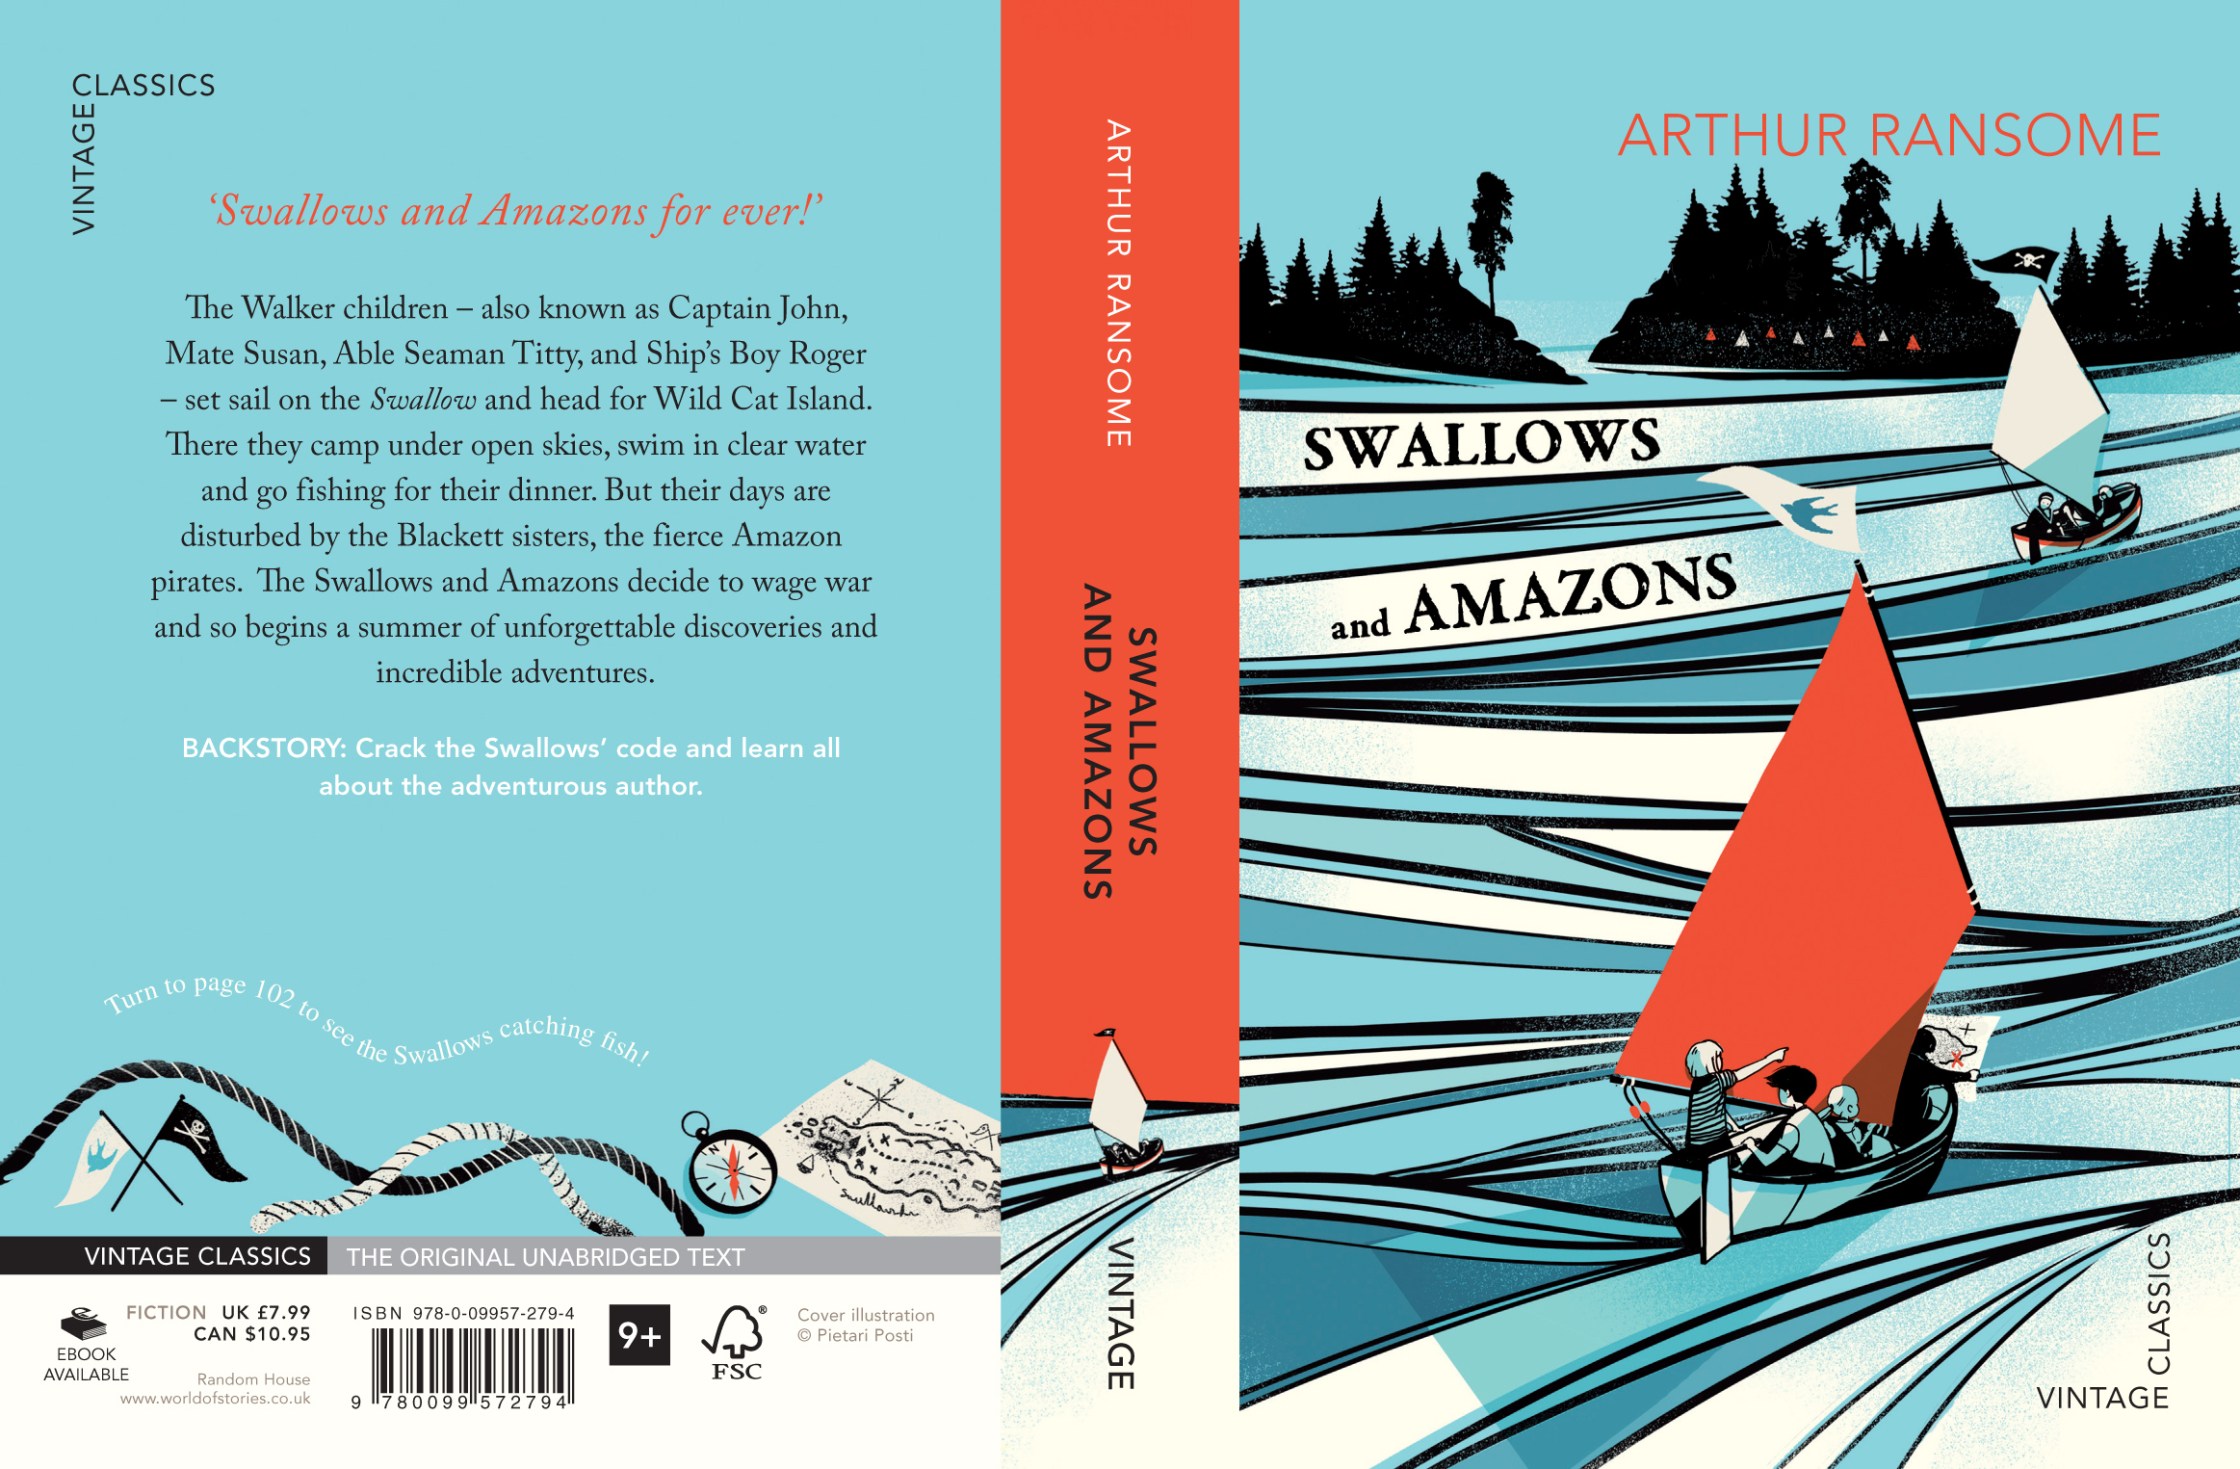 Arthur Ransome - Swallows And Amazons Cover